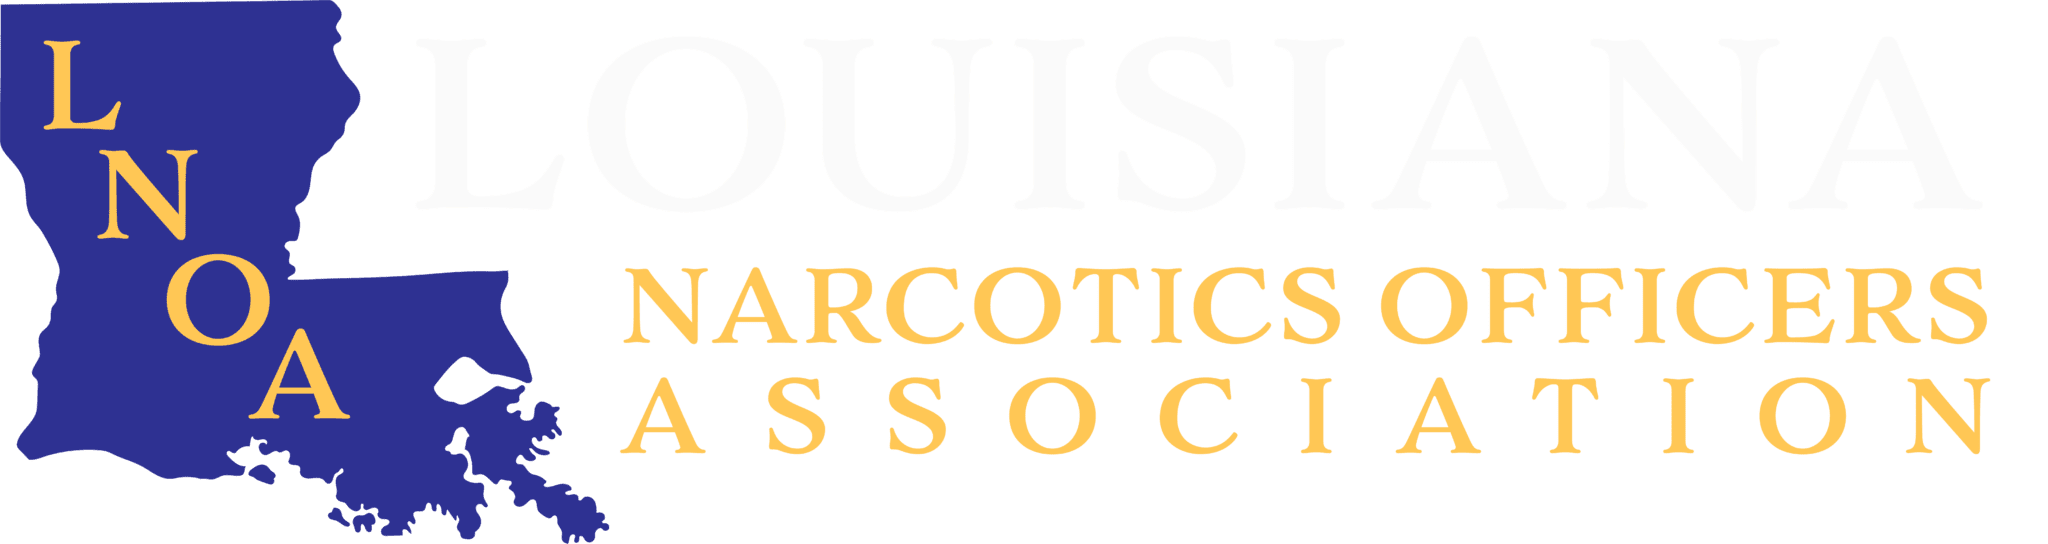 Louisiana Narcotics Officers Association Fostering Good Will Among